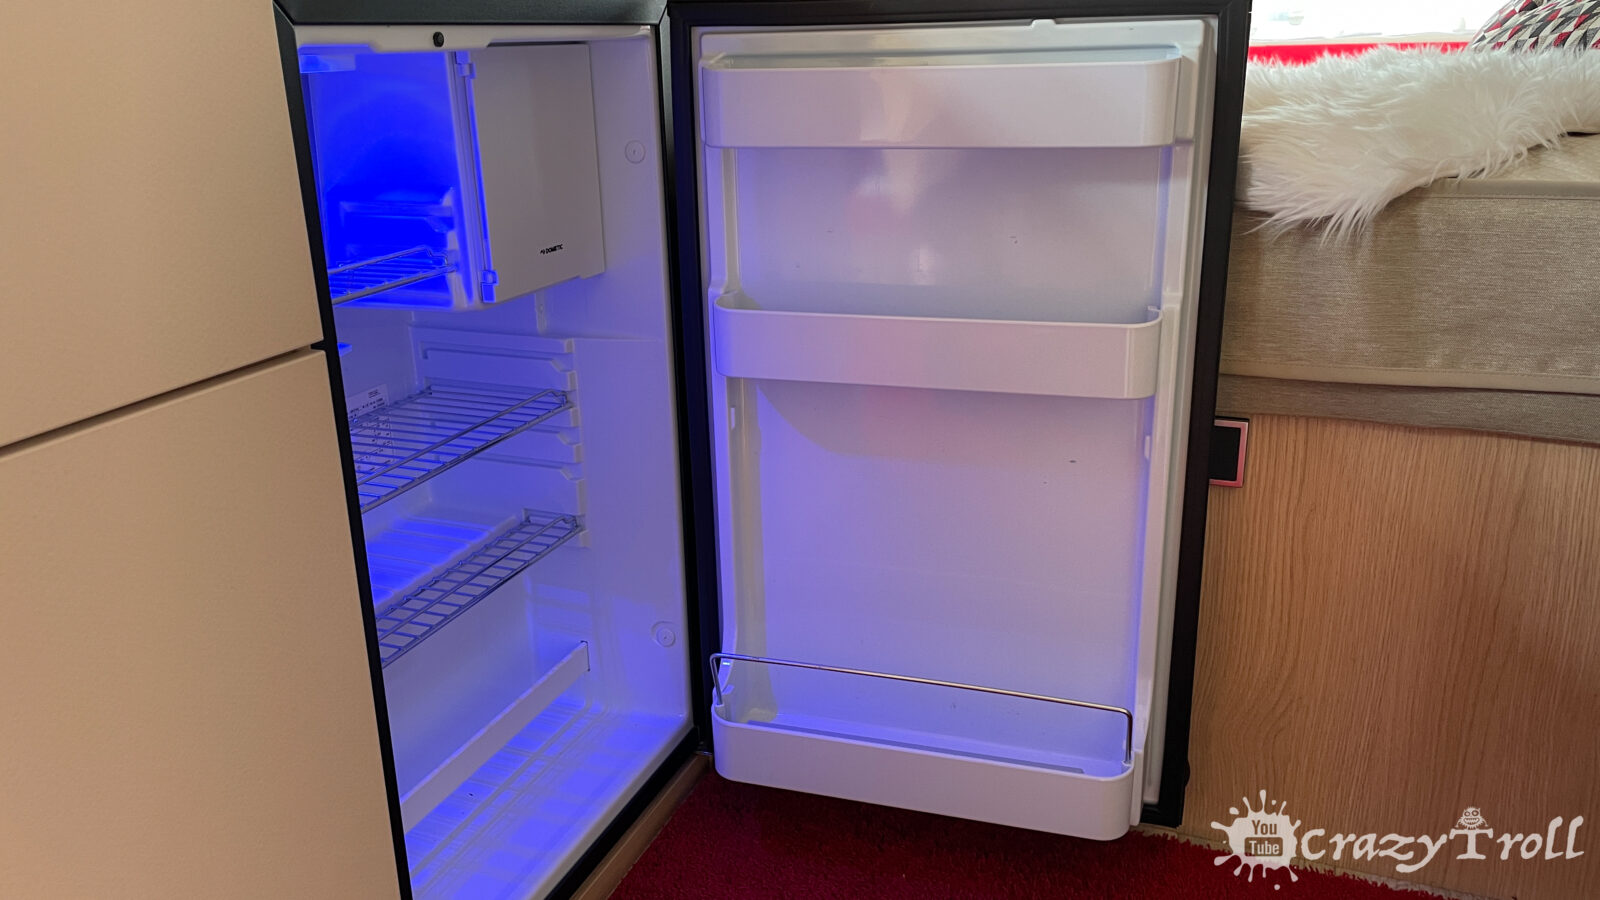 Does An RV Refrigerator Work Better on Gas or Electric?